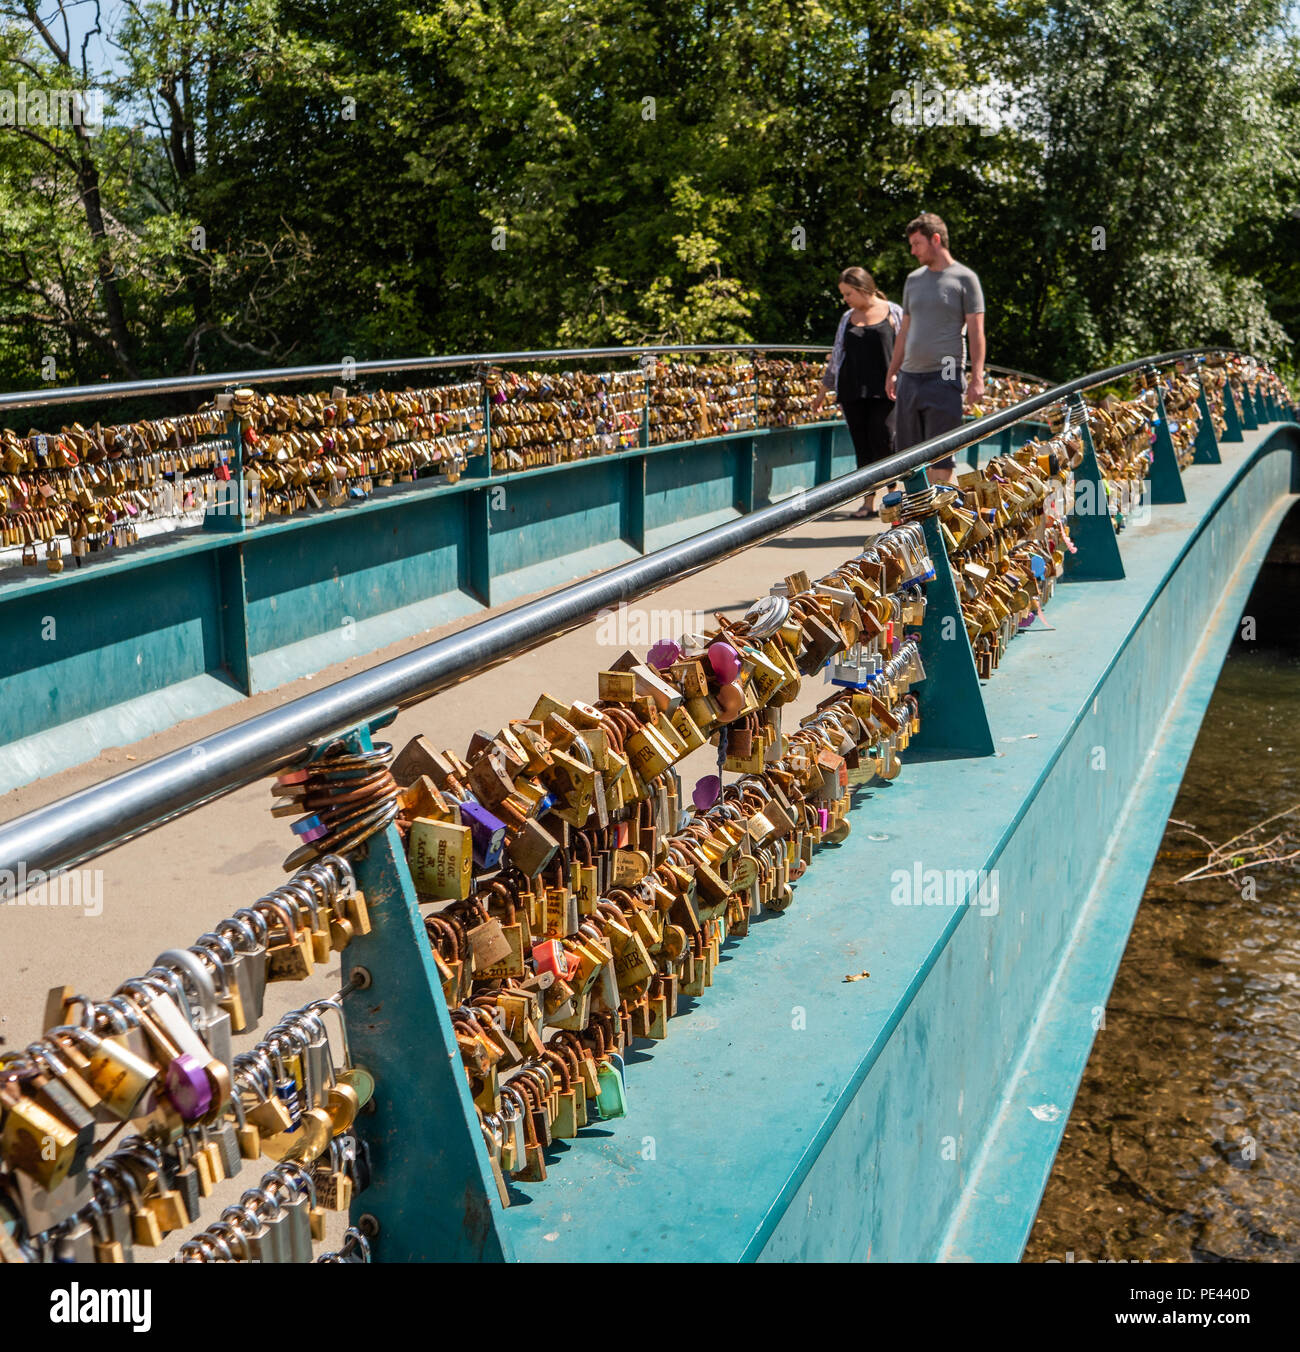 Bridge over the River Wye at Bakewell in Derbyshire covered in padlocks or love locks - many remain in place far longer than the trysts they symbolise Stock Photo